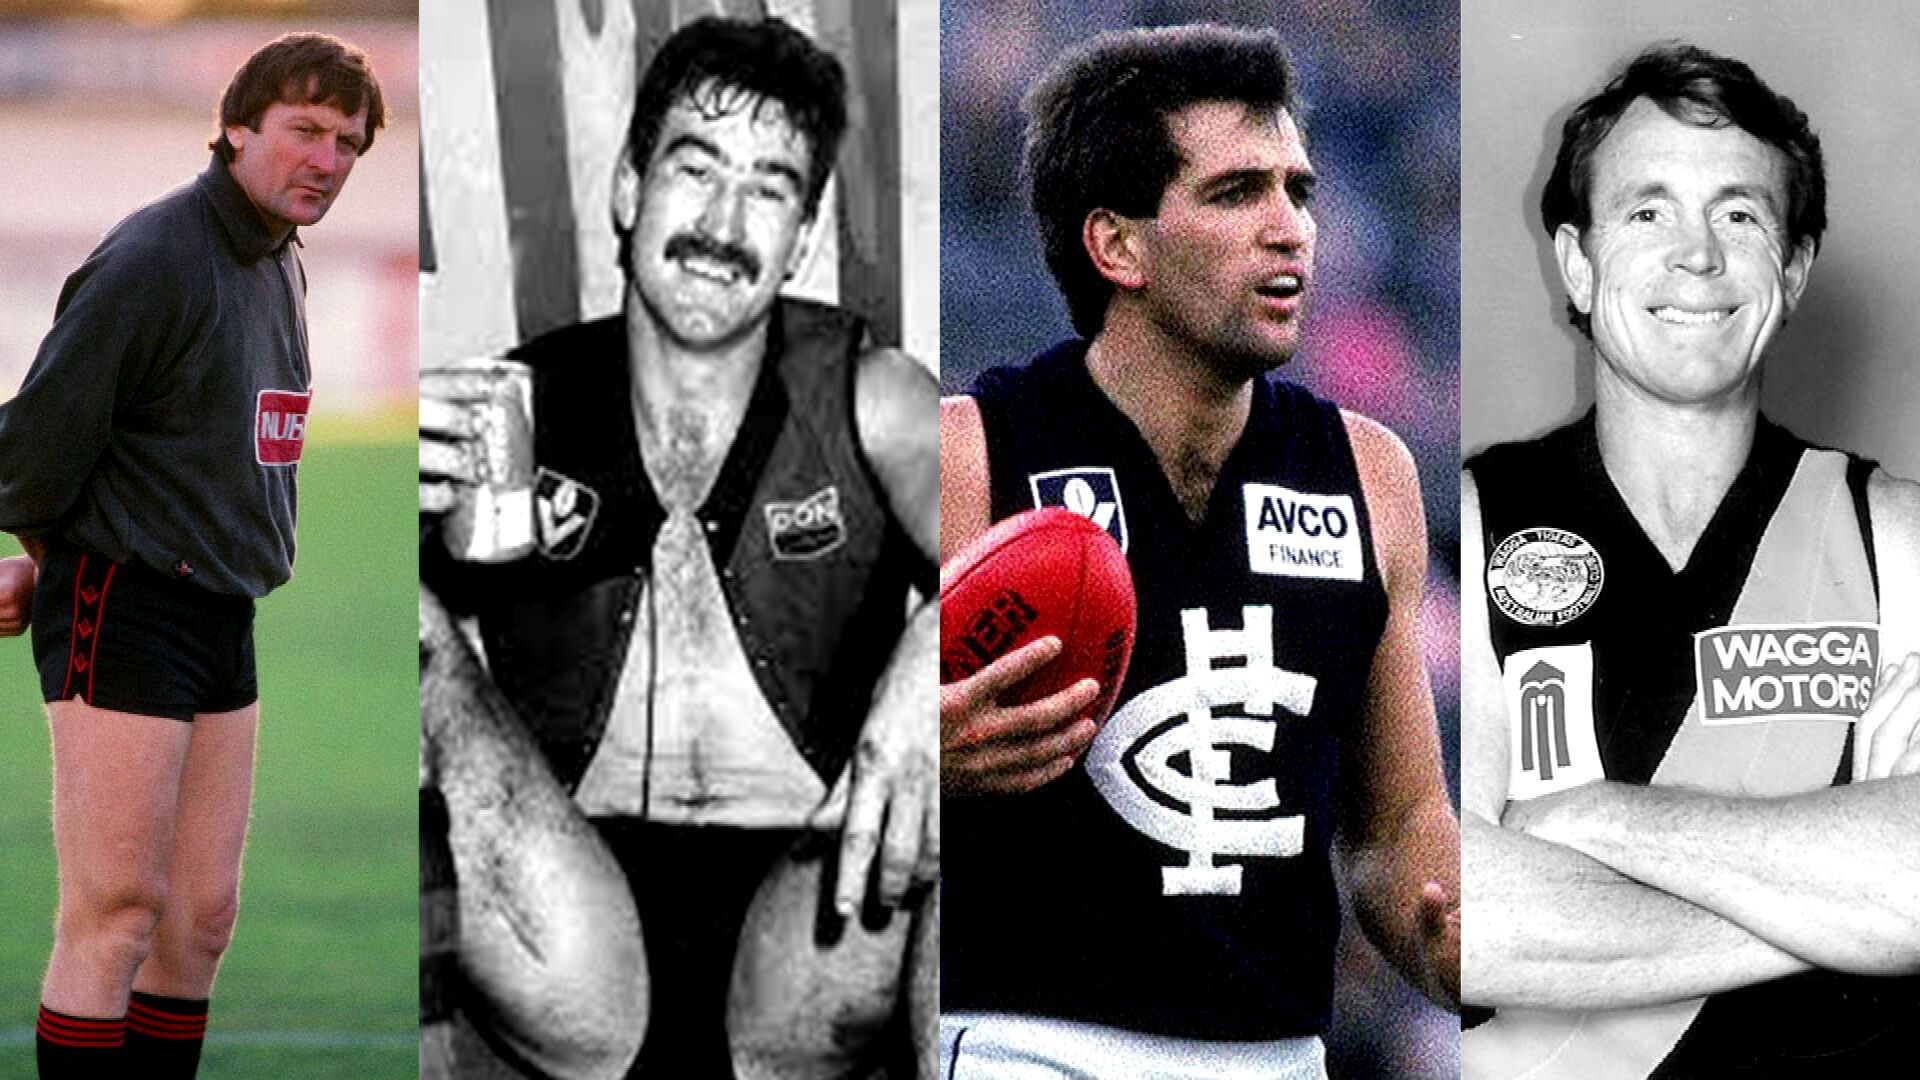 AFL greats named in bombshell racism class action submitted by North Melbourne legends Jim and Phil Krakouer